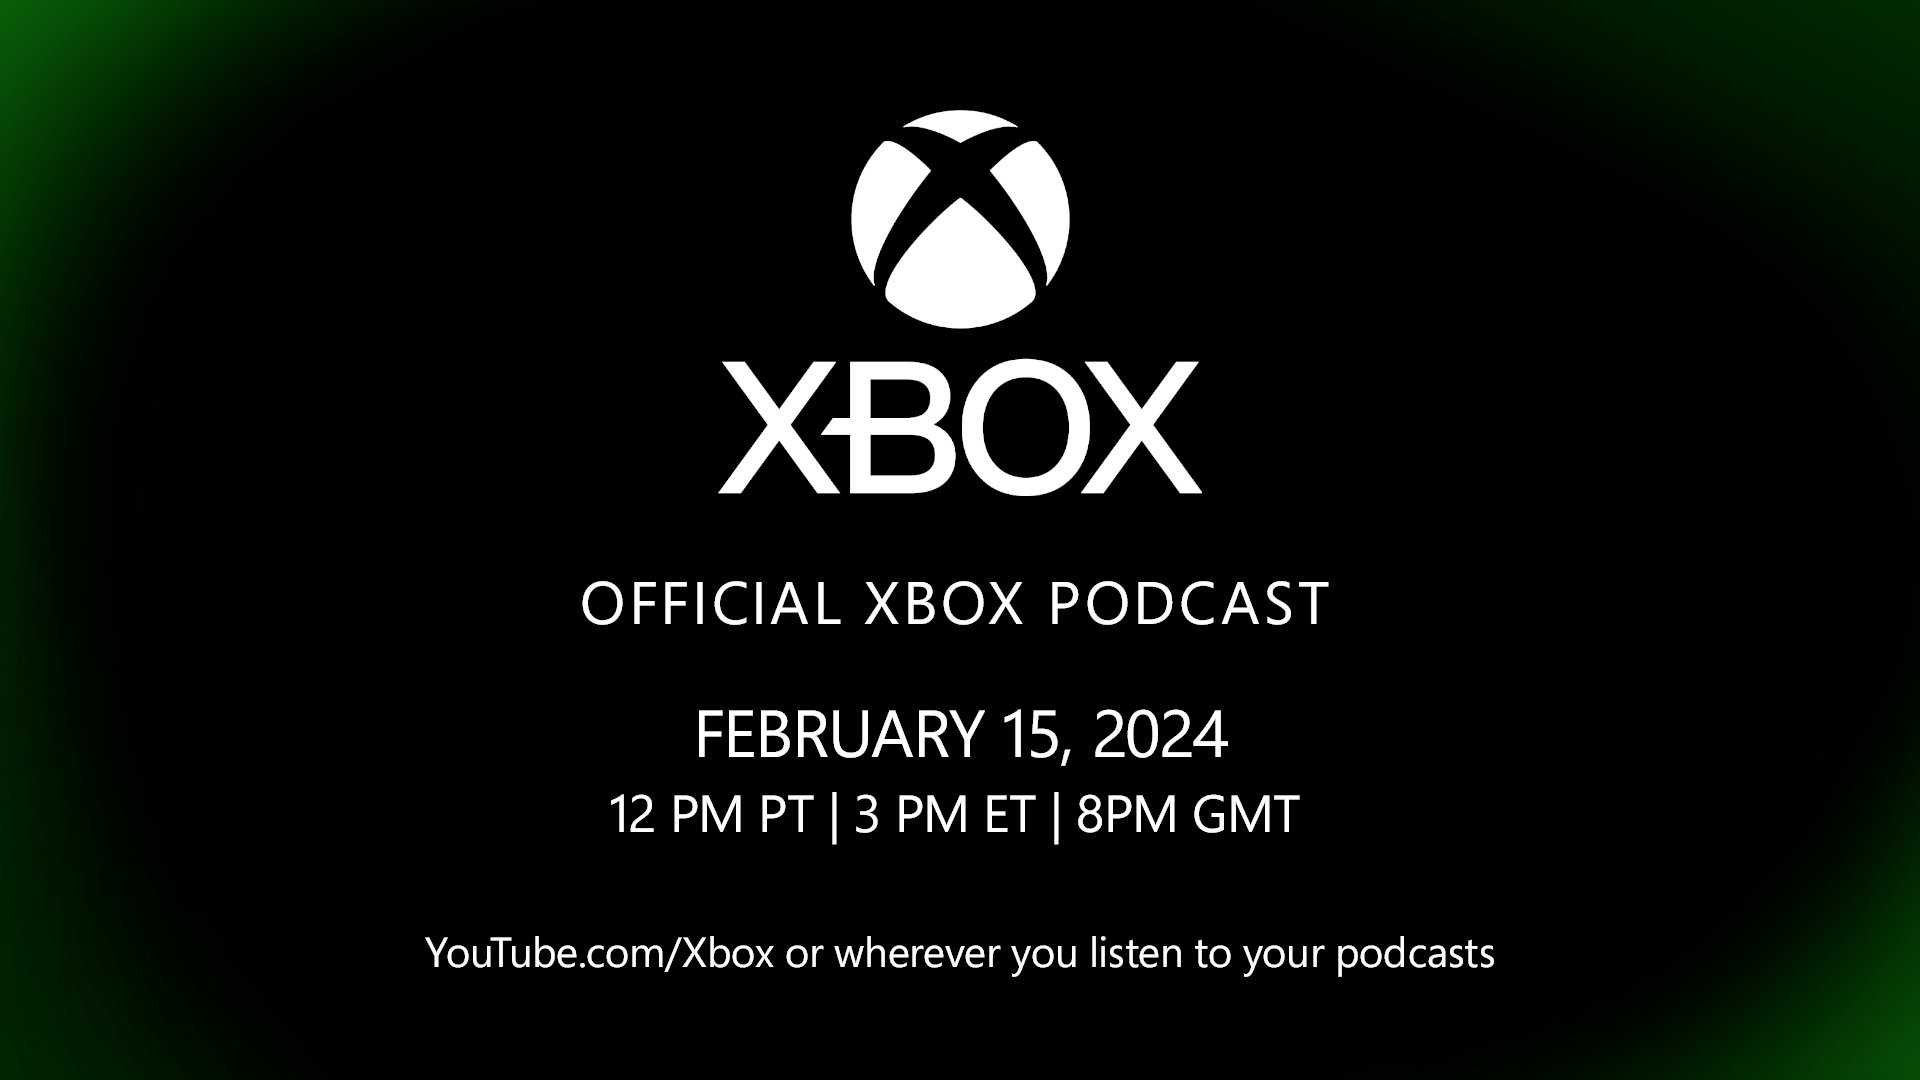 #
      Xbox Official Podcast special edition set for February 15 featuring ‘Xbox business updates’ [Update]